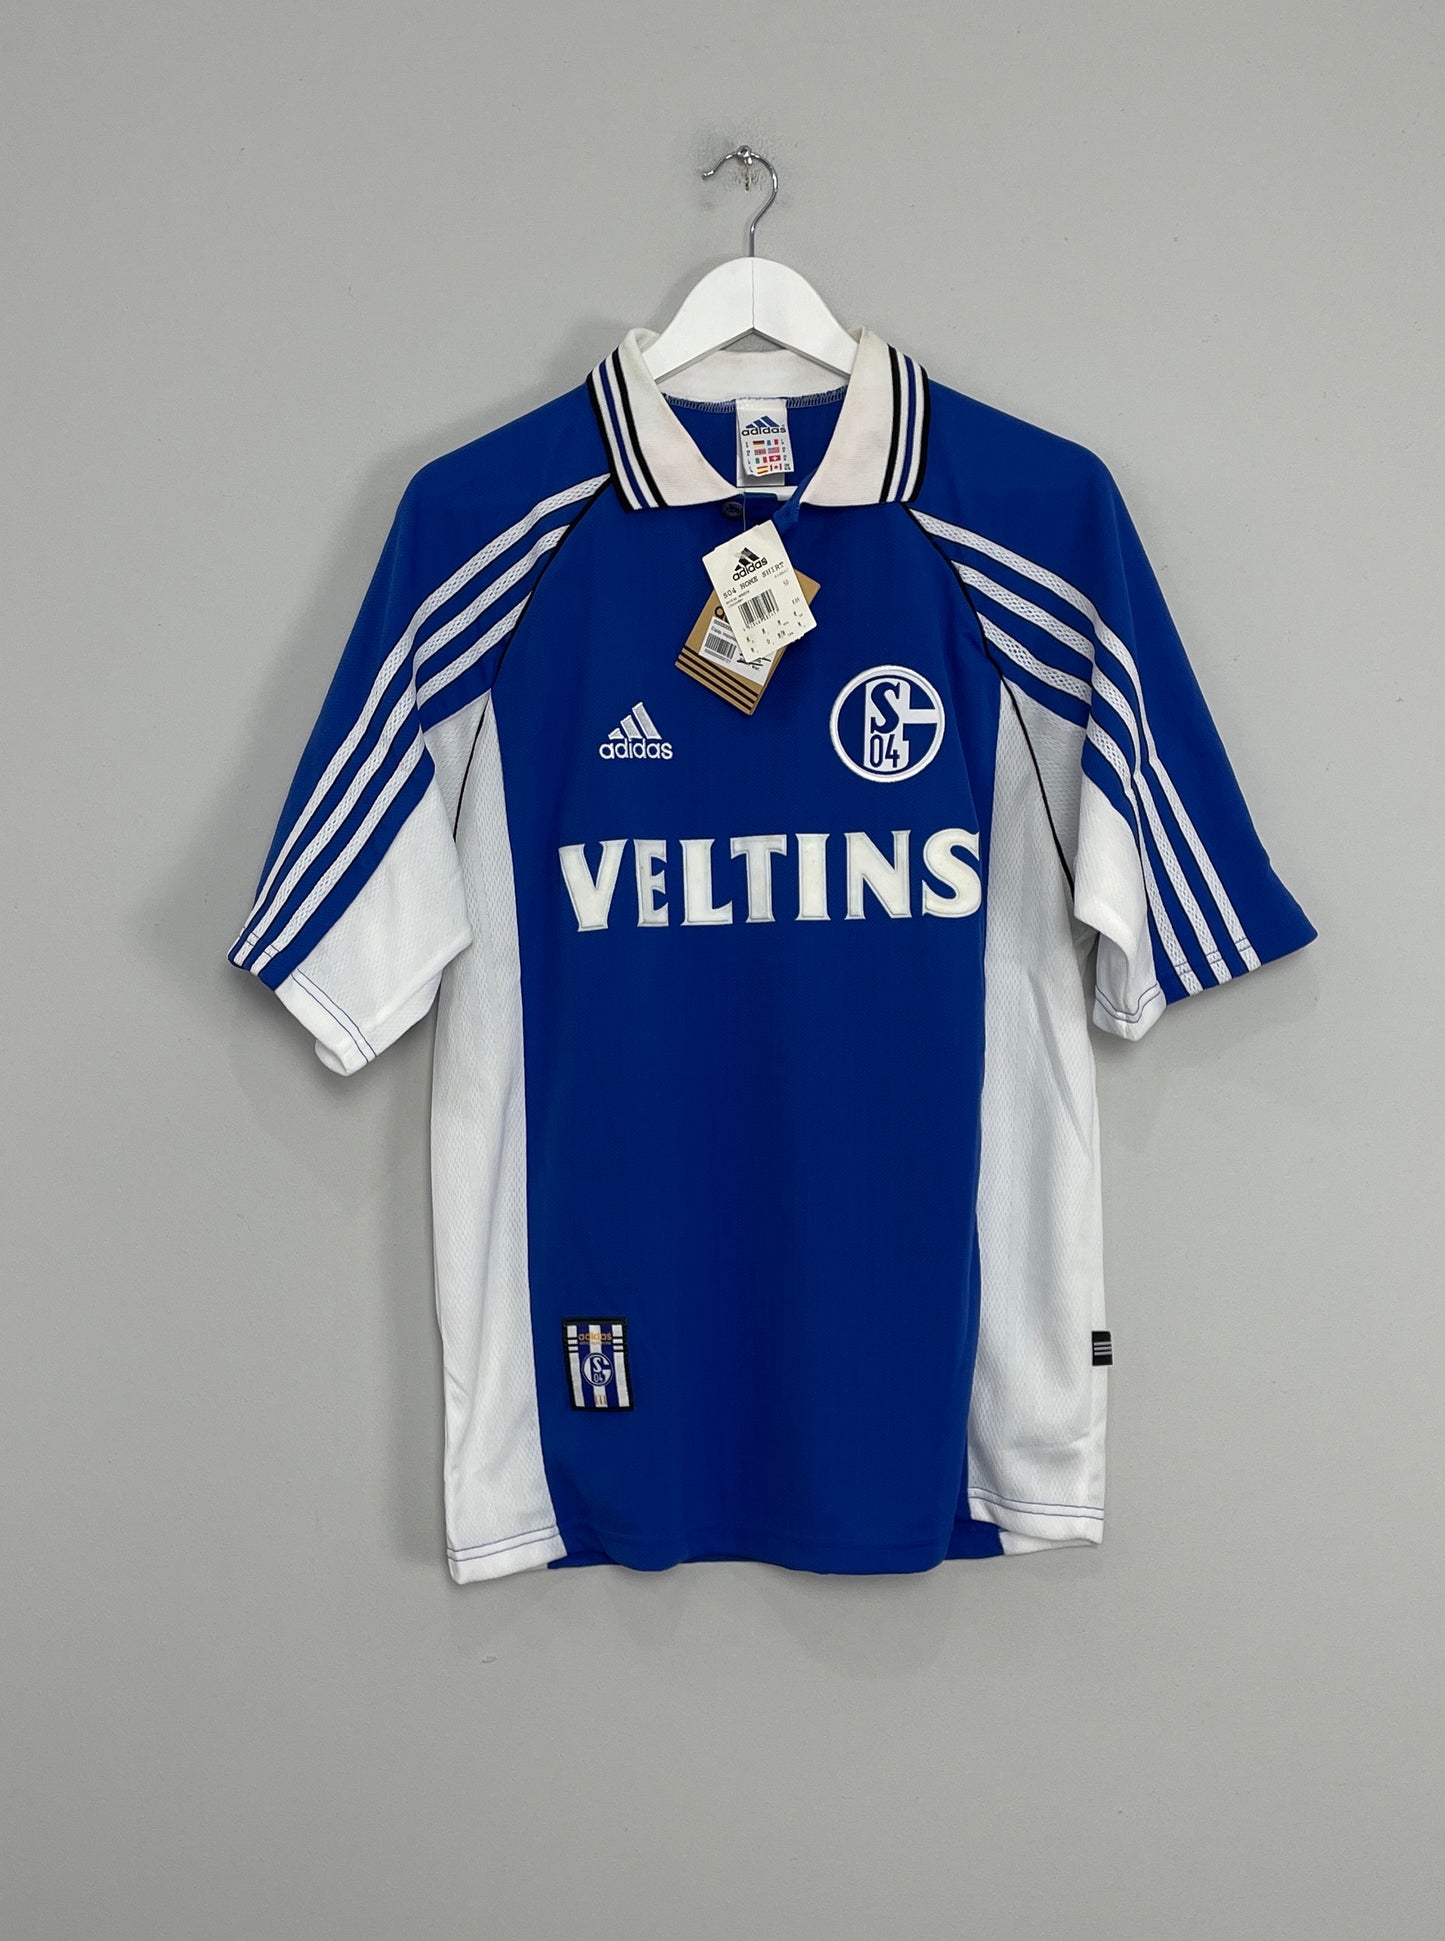 Image of the Schalke shirt from the 1998/00 season